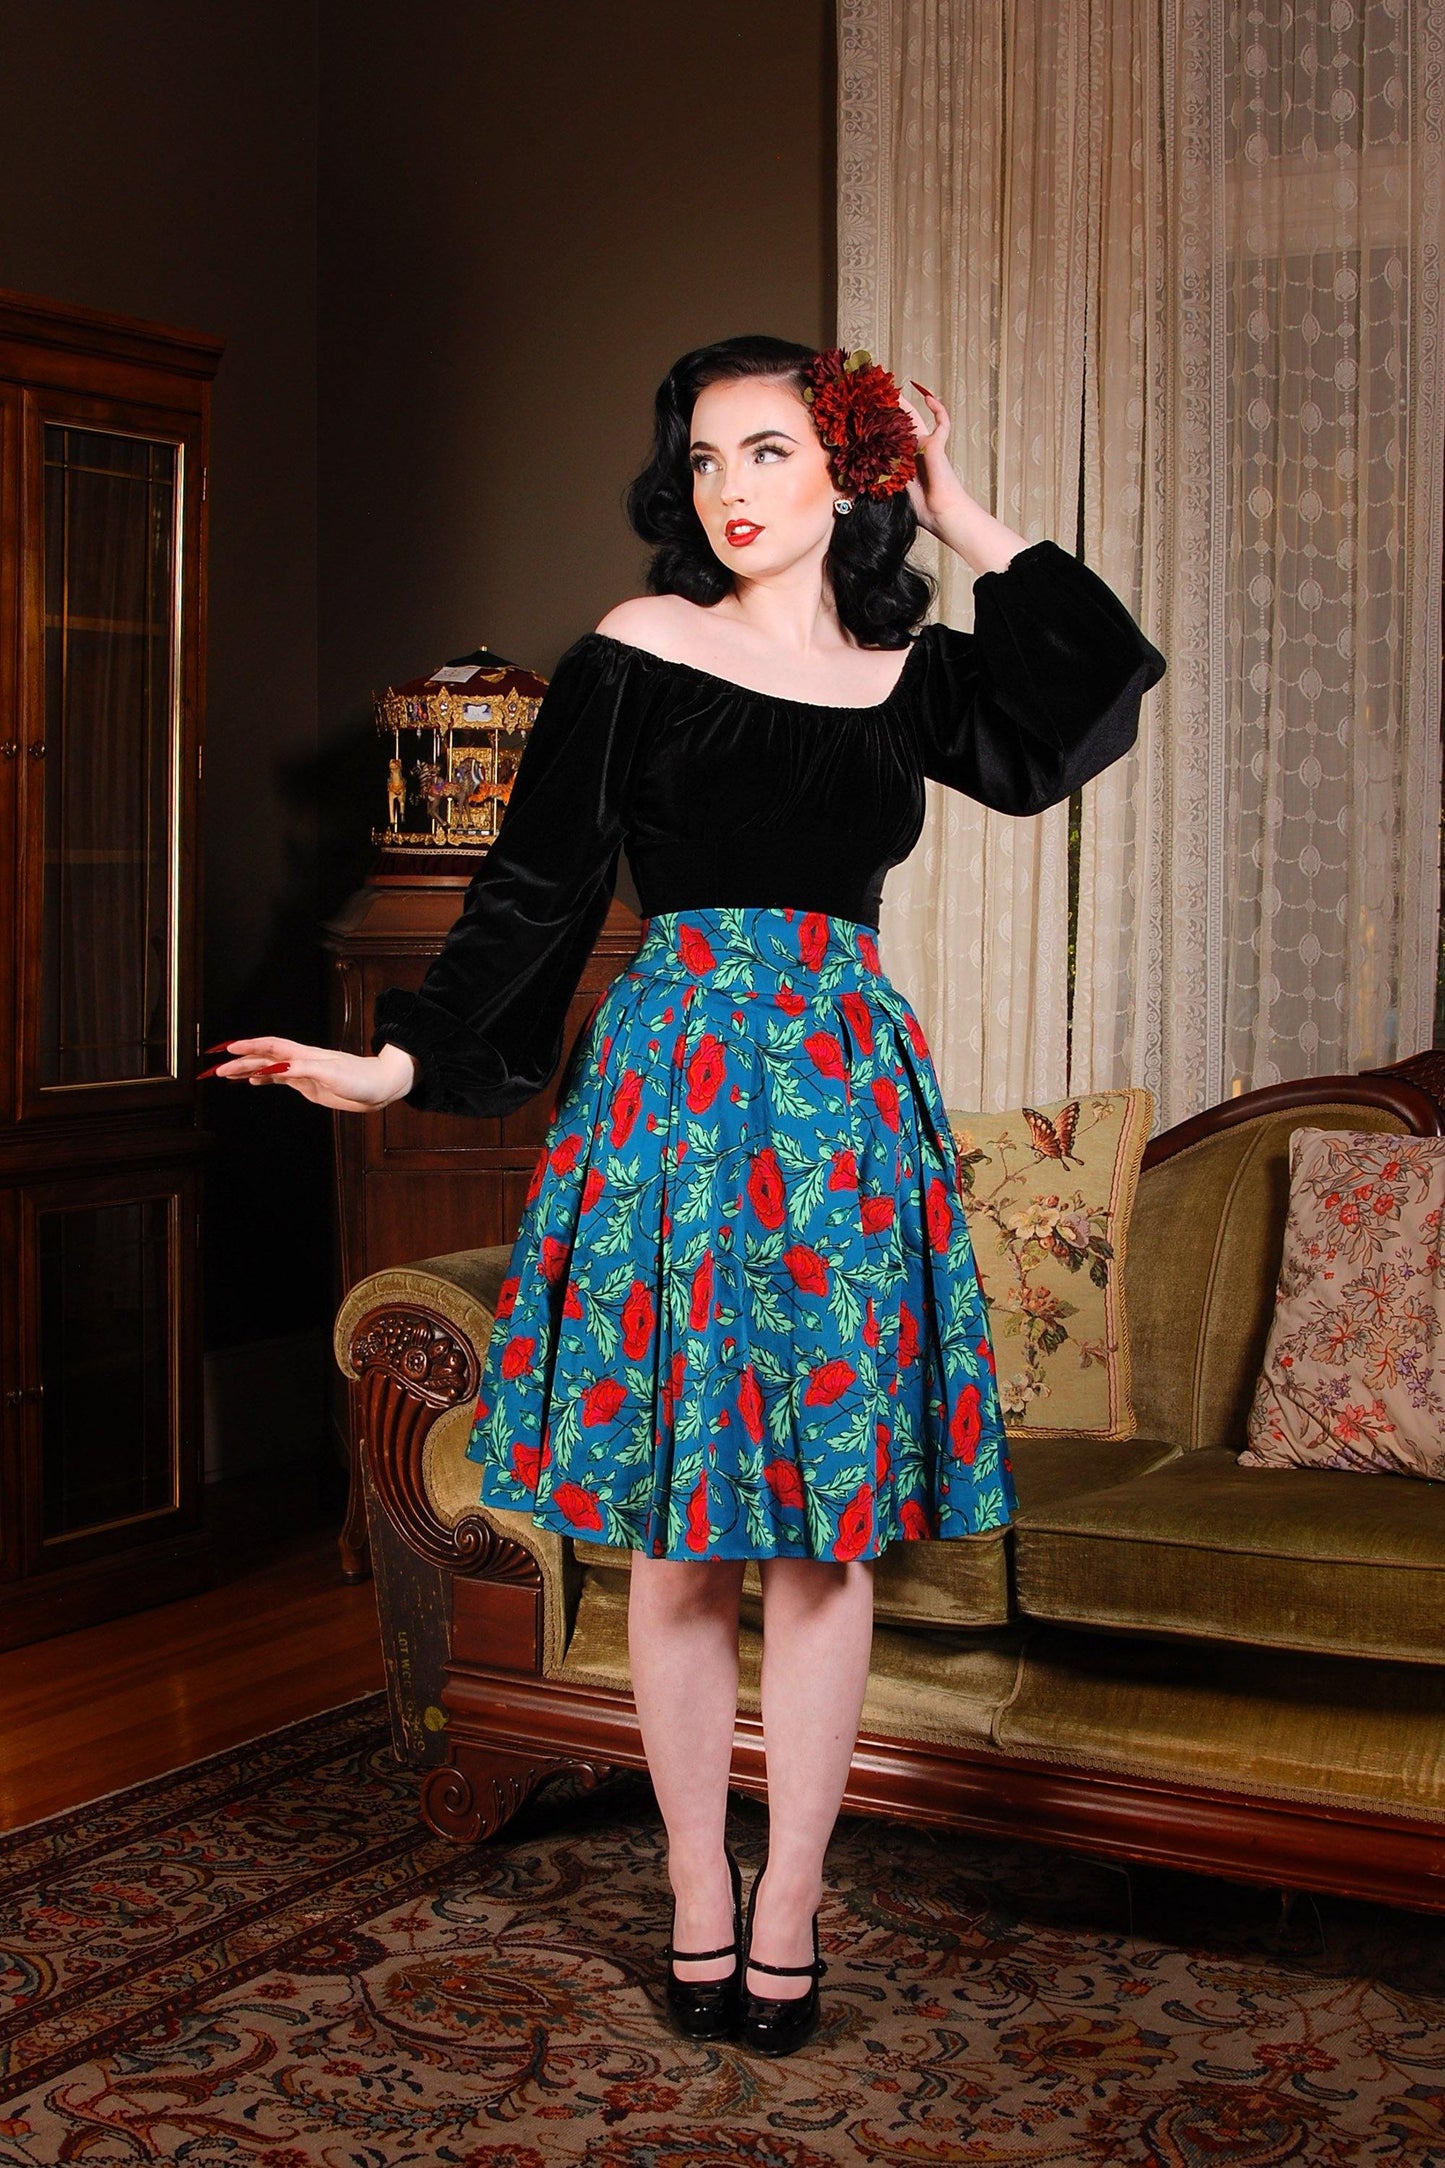 Swann Long Sleeve Peasant Top in Black Stretch Velvet | Pinup Couture - pinupgirlclothing.com